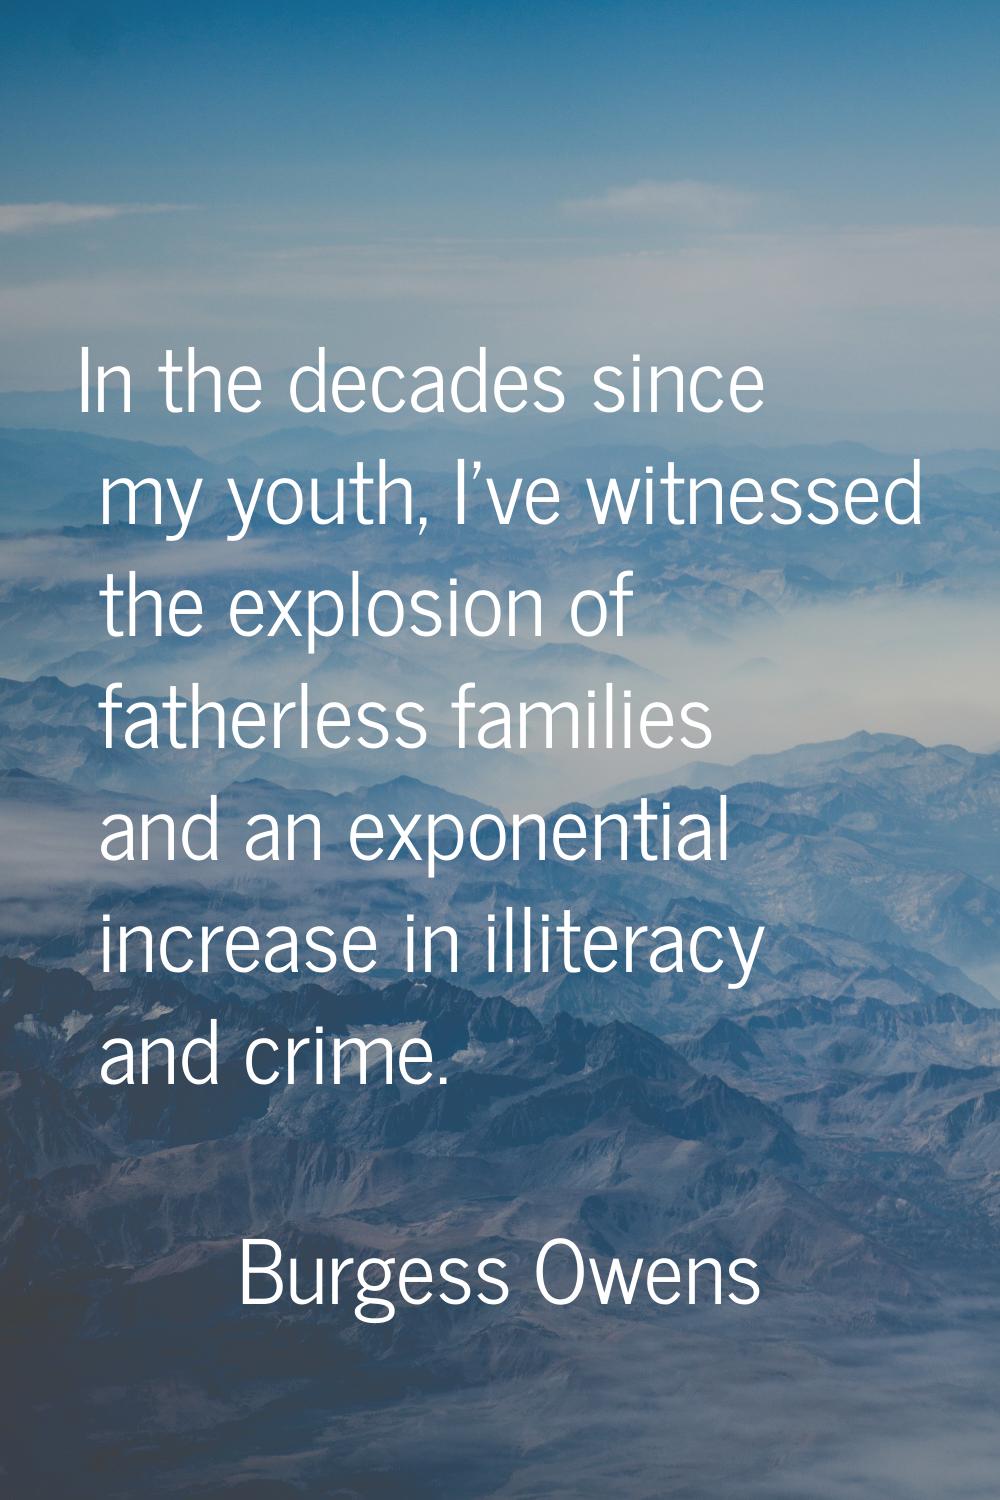 In the decades since my youth, I've witnessed the explosion of fatherless families and an exponenti